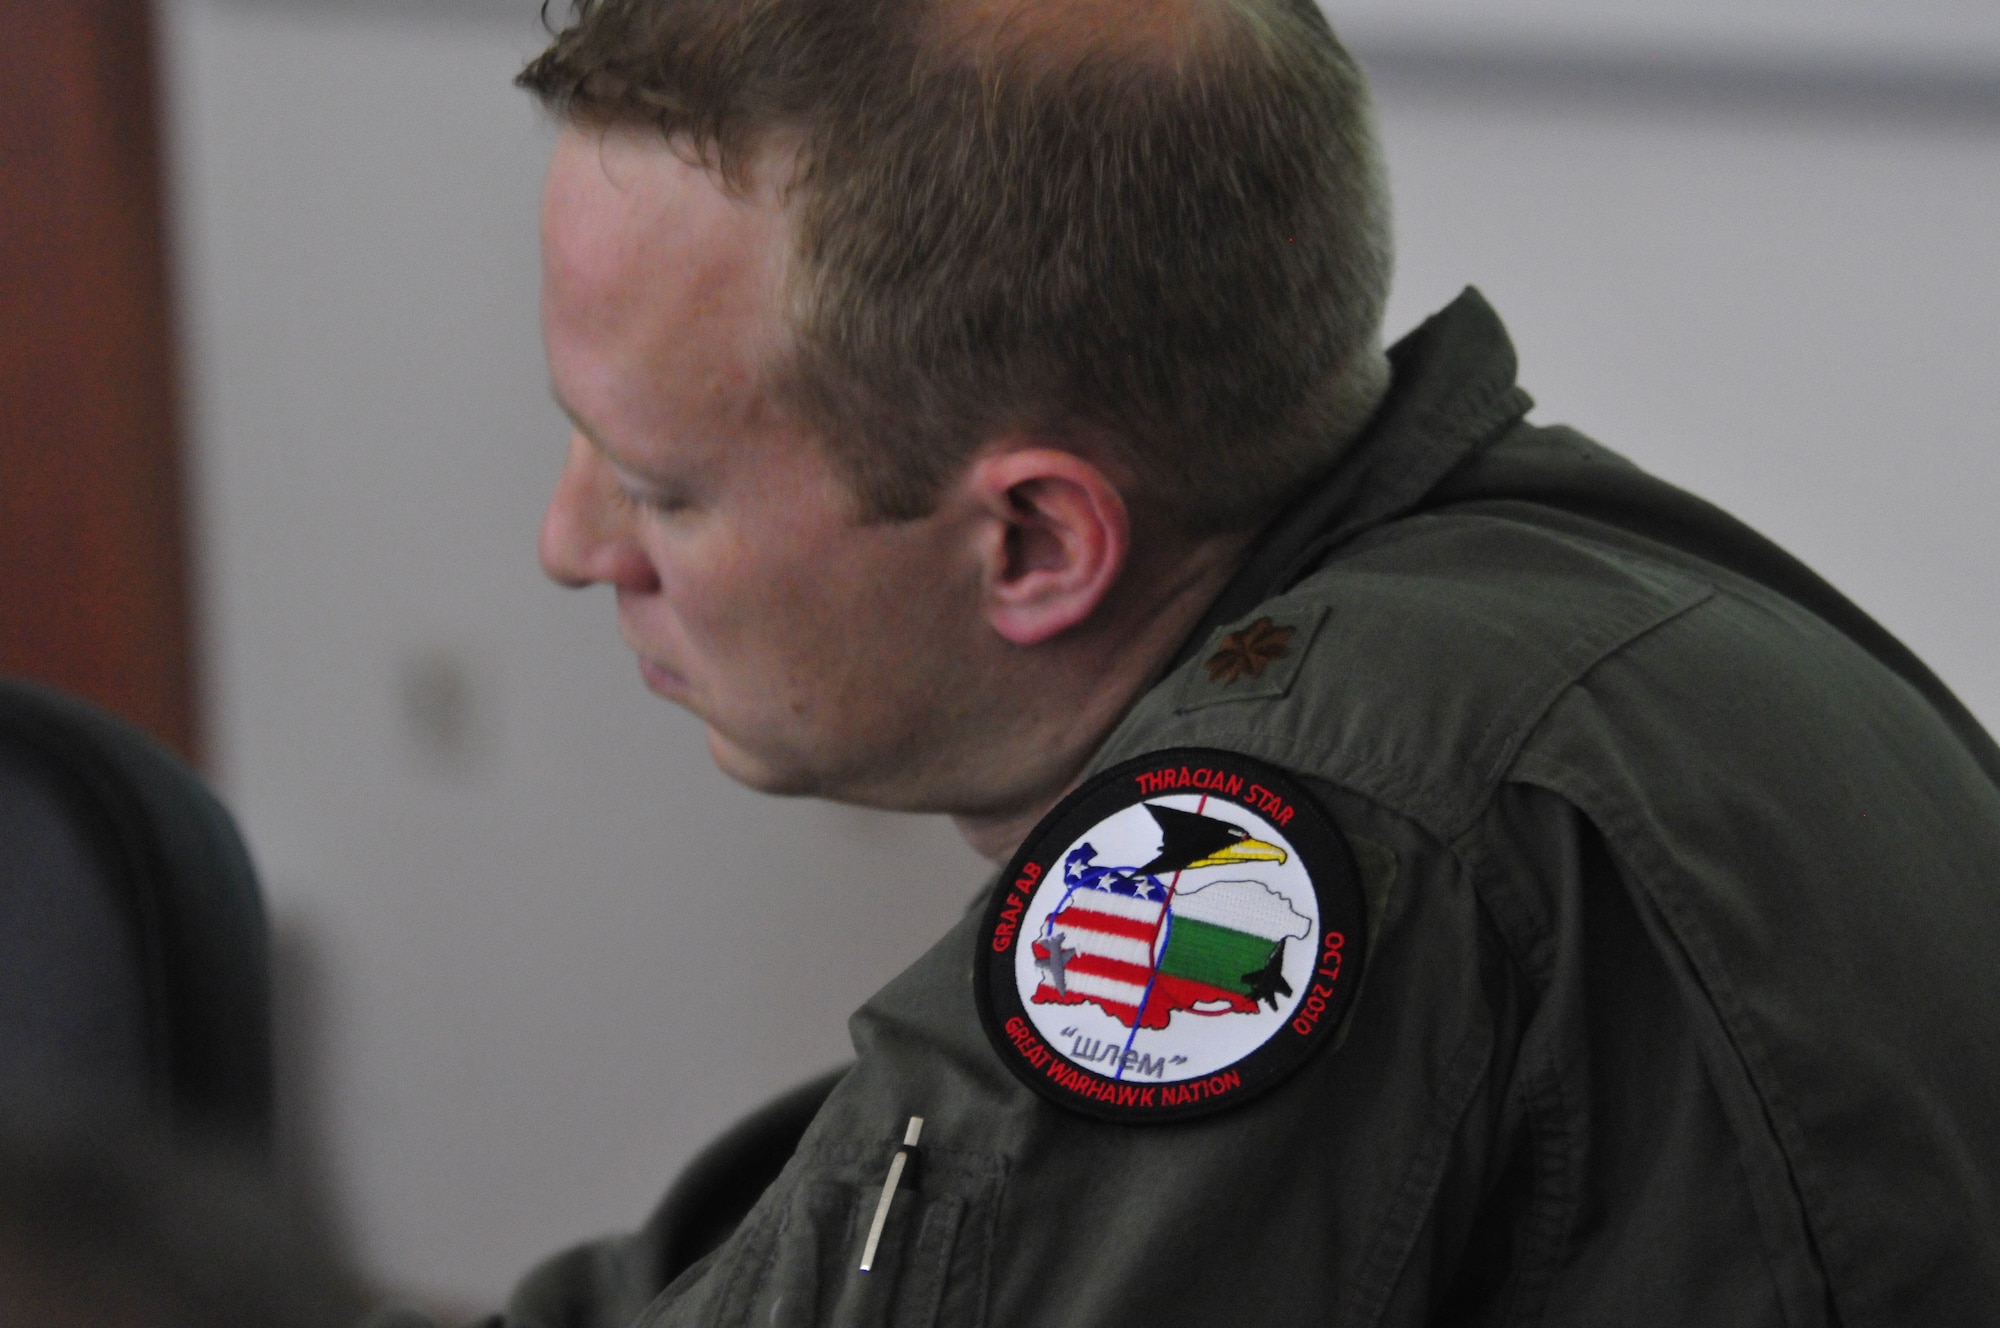 U.S. Air Force Maj. Ryan Freeland, 480th Fighter Squadron Flight Surgeon from Spangdahlem Air Base, Germany briefs his Bulgarian Air Force counterparts on flight medicine techniques used in the U.S. Air Force during a round-table discussion at Graf Ignatievo Air Base, Bulgaria, Oct. 19.  Airmen from the 86th Airlift Wing and 435th Air Ground Operations Wing at Ramstein Air Base, Germany joined airmen from throughout U.S. Air Forces in Europe in Plovdiv, Bulgaria, for Thracian Fall 2010, a week of on-site training designed to building the partnership between the U.S. and Bulgarian Air Force. (U.S. Air Force photo by Tech. Sgt. Michael Voss)